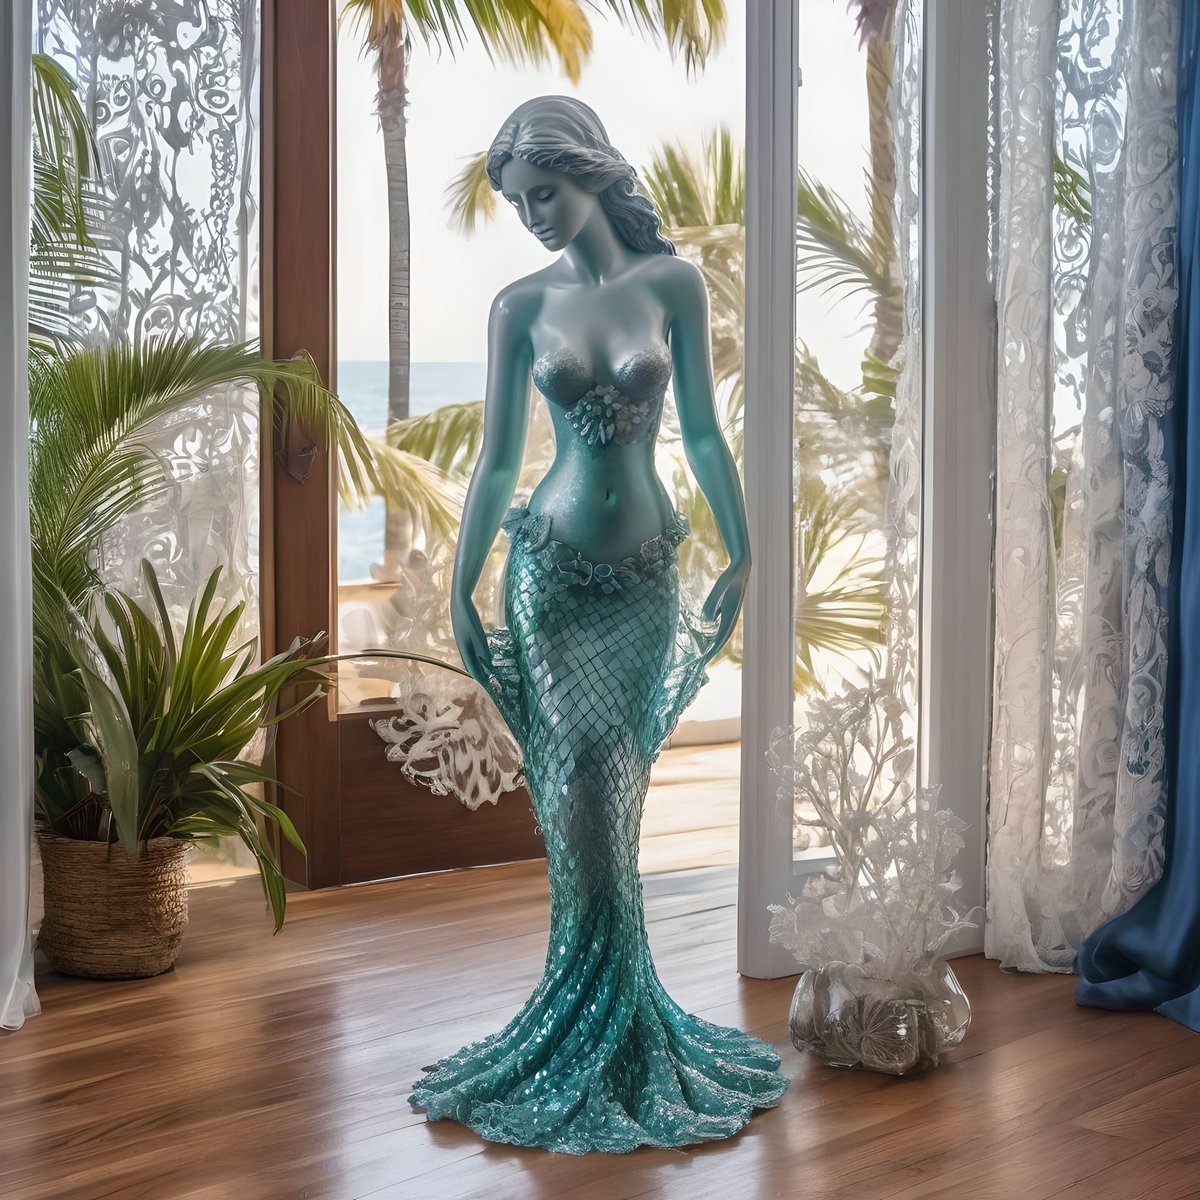 Whether you're a believer or not, there's no denying the allure of mermaids. #ForTheLoveOfMermaids #MythicalCreatures #OceanLife